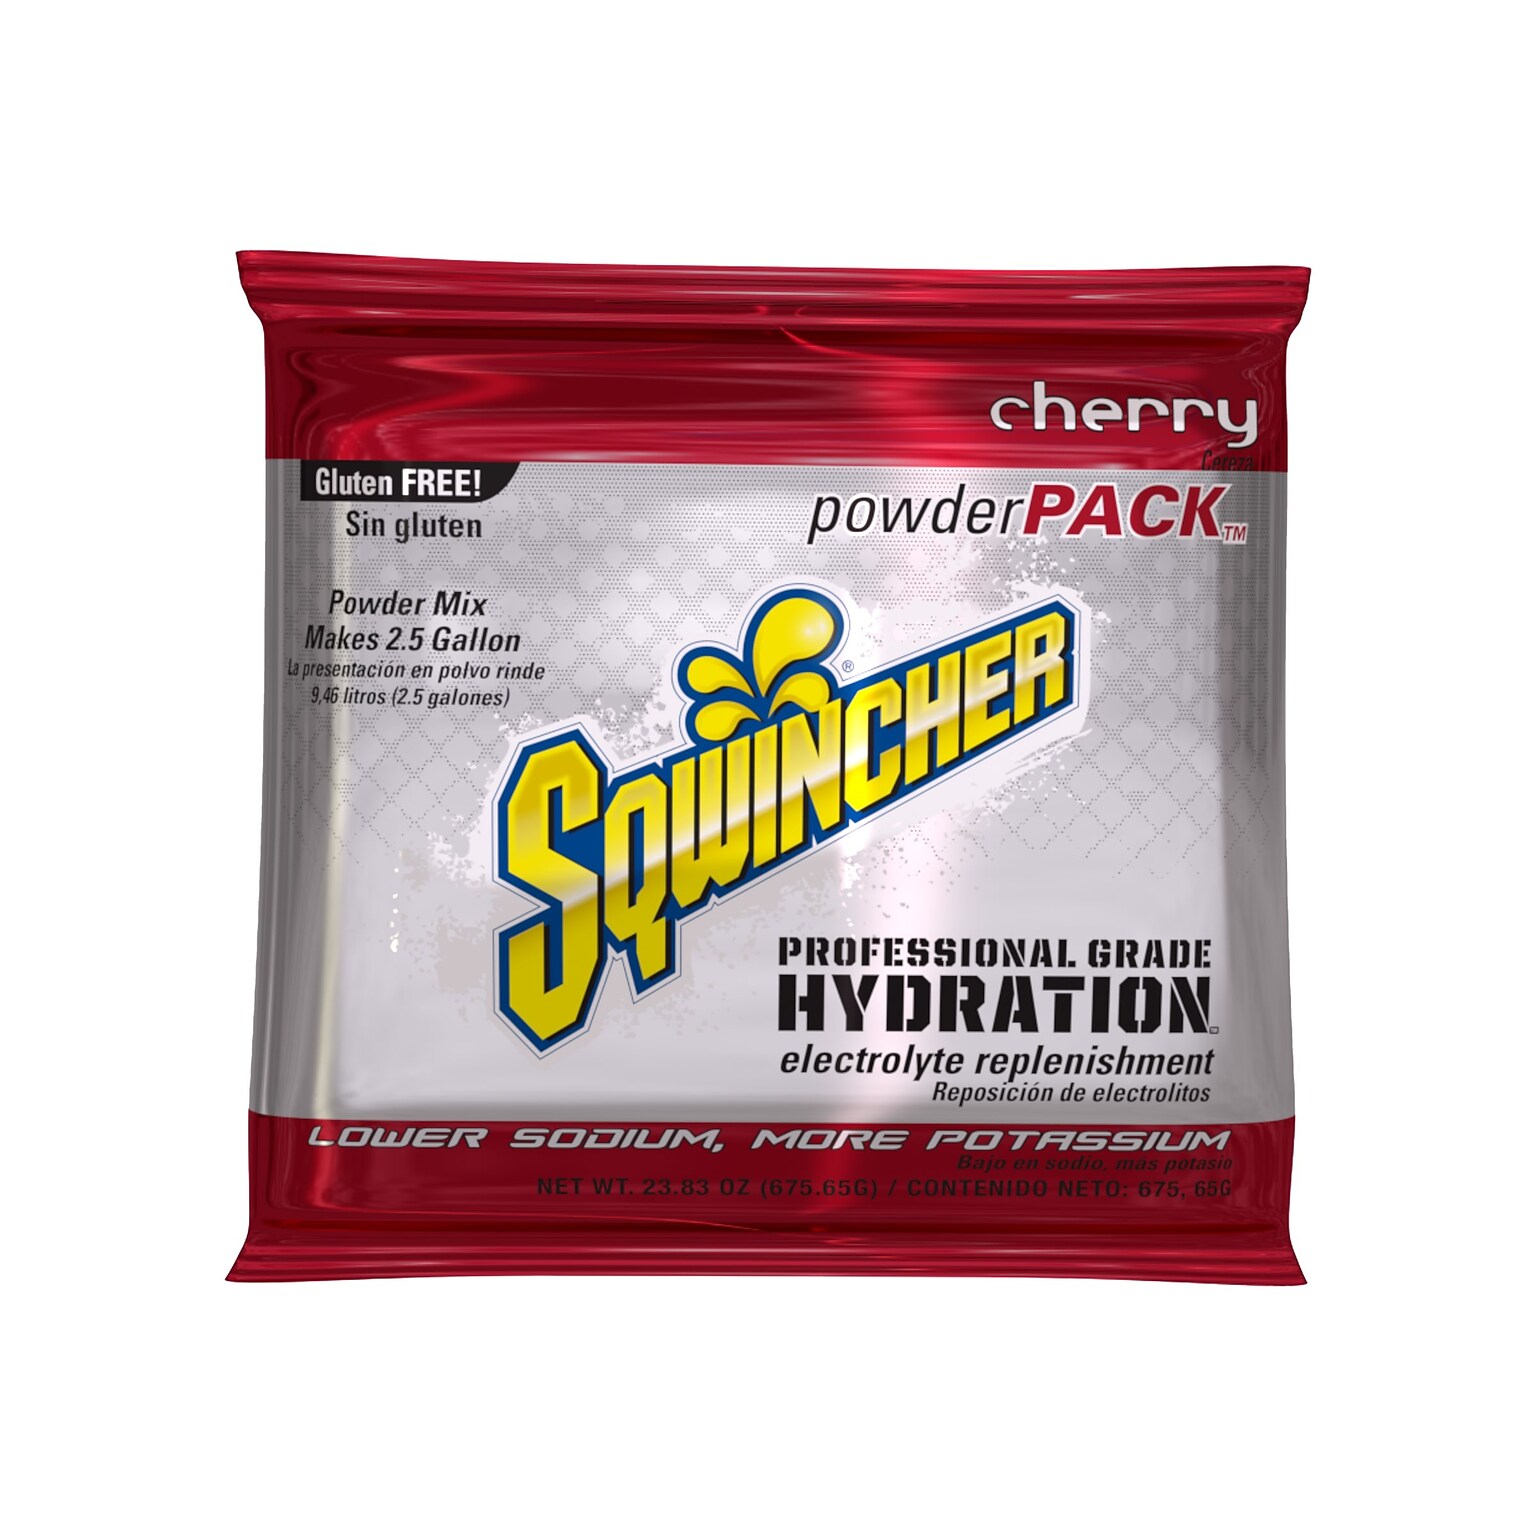 Sqwincher Powder Pack Assorted Flavors Powdered Sports Drink, 23.83 oz., 32 Packet/Carton (016044-AS)